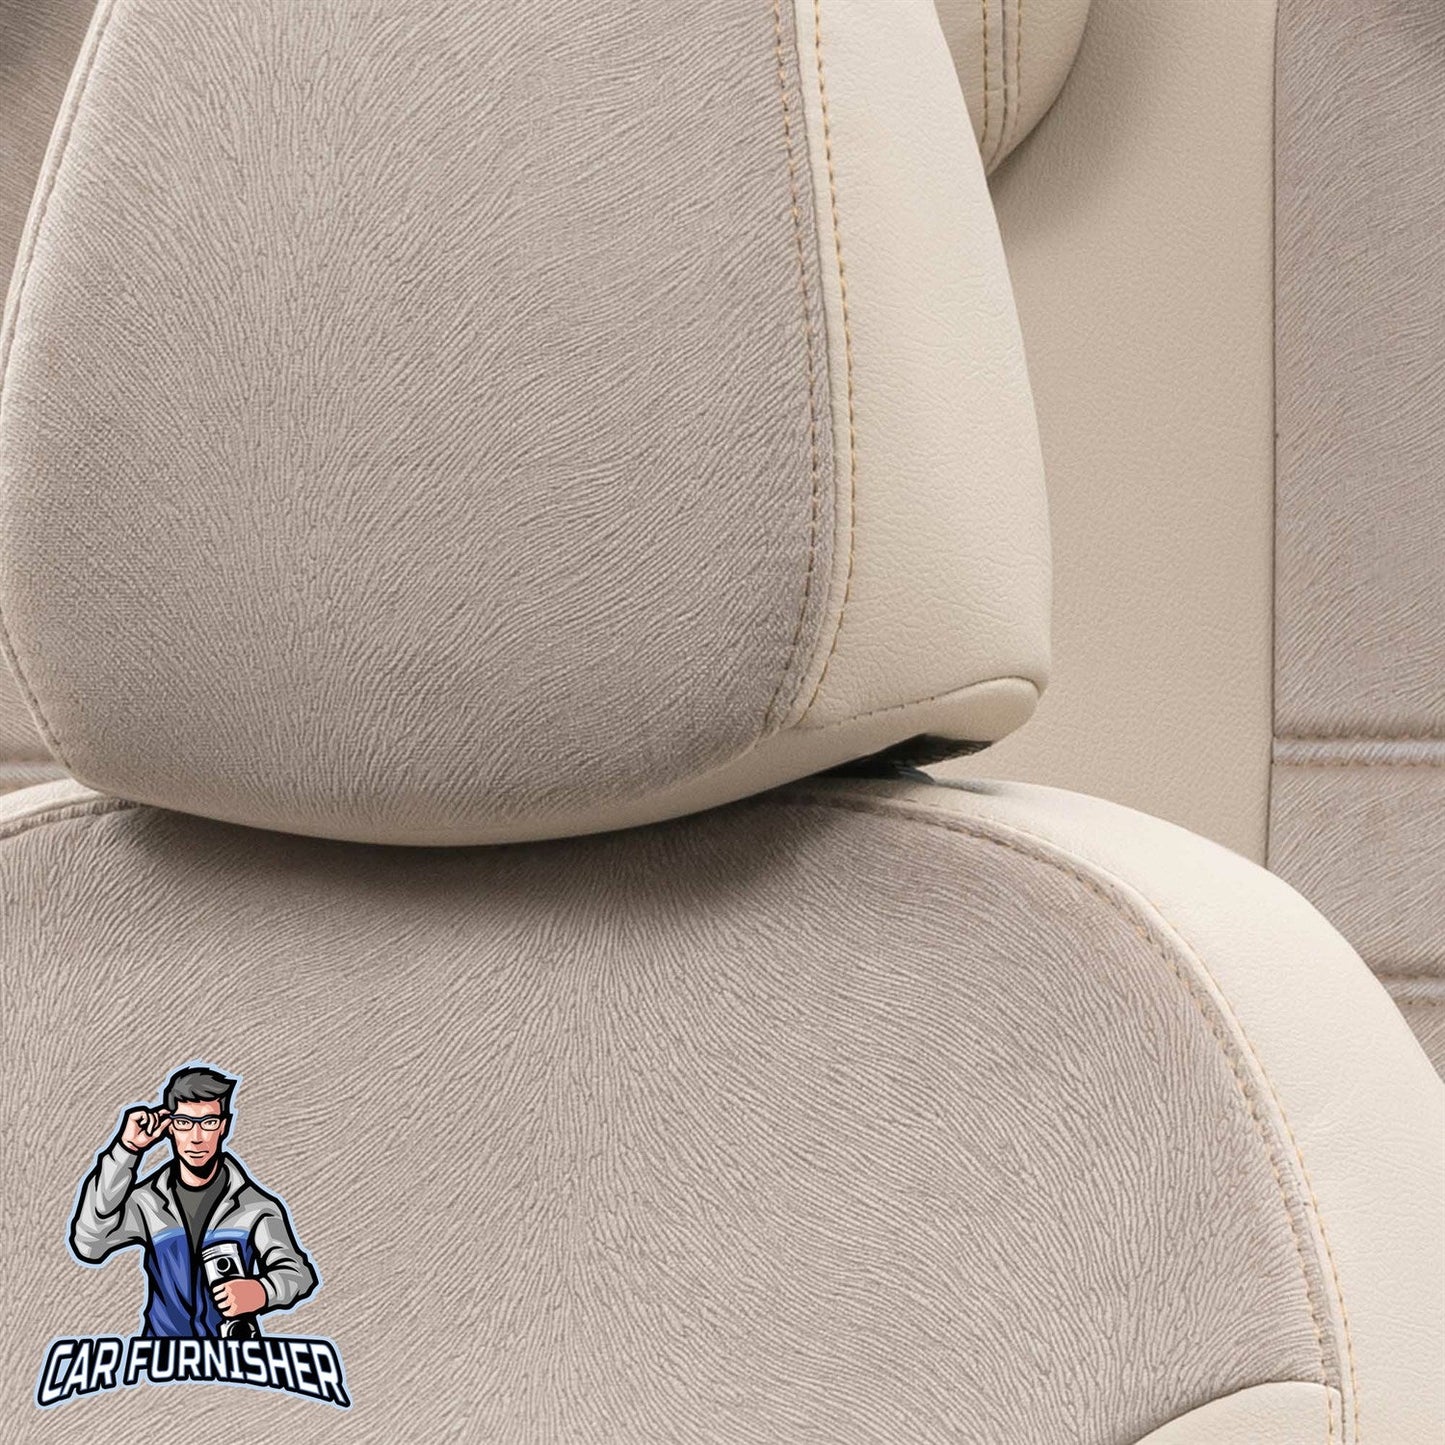 Volvo XC40 Seat Cover London Foal Feather Design Beige Leather & Foal Feather